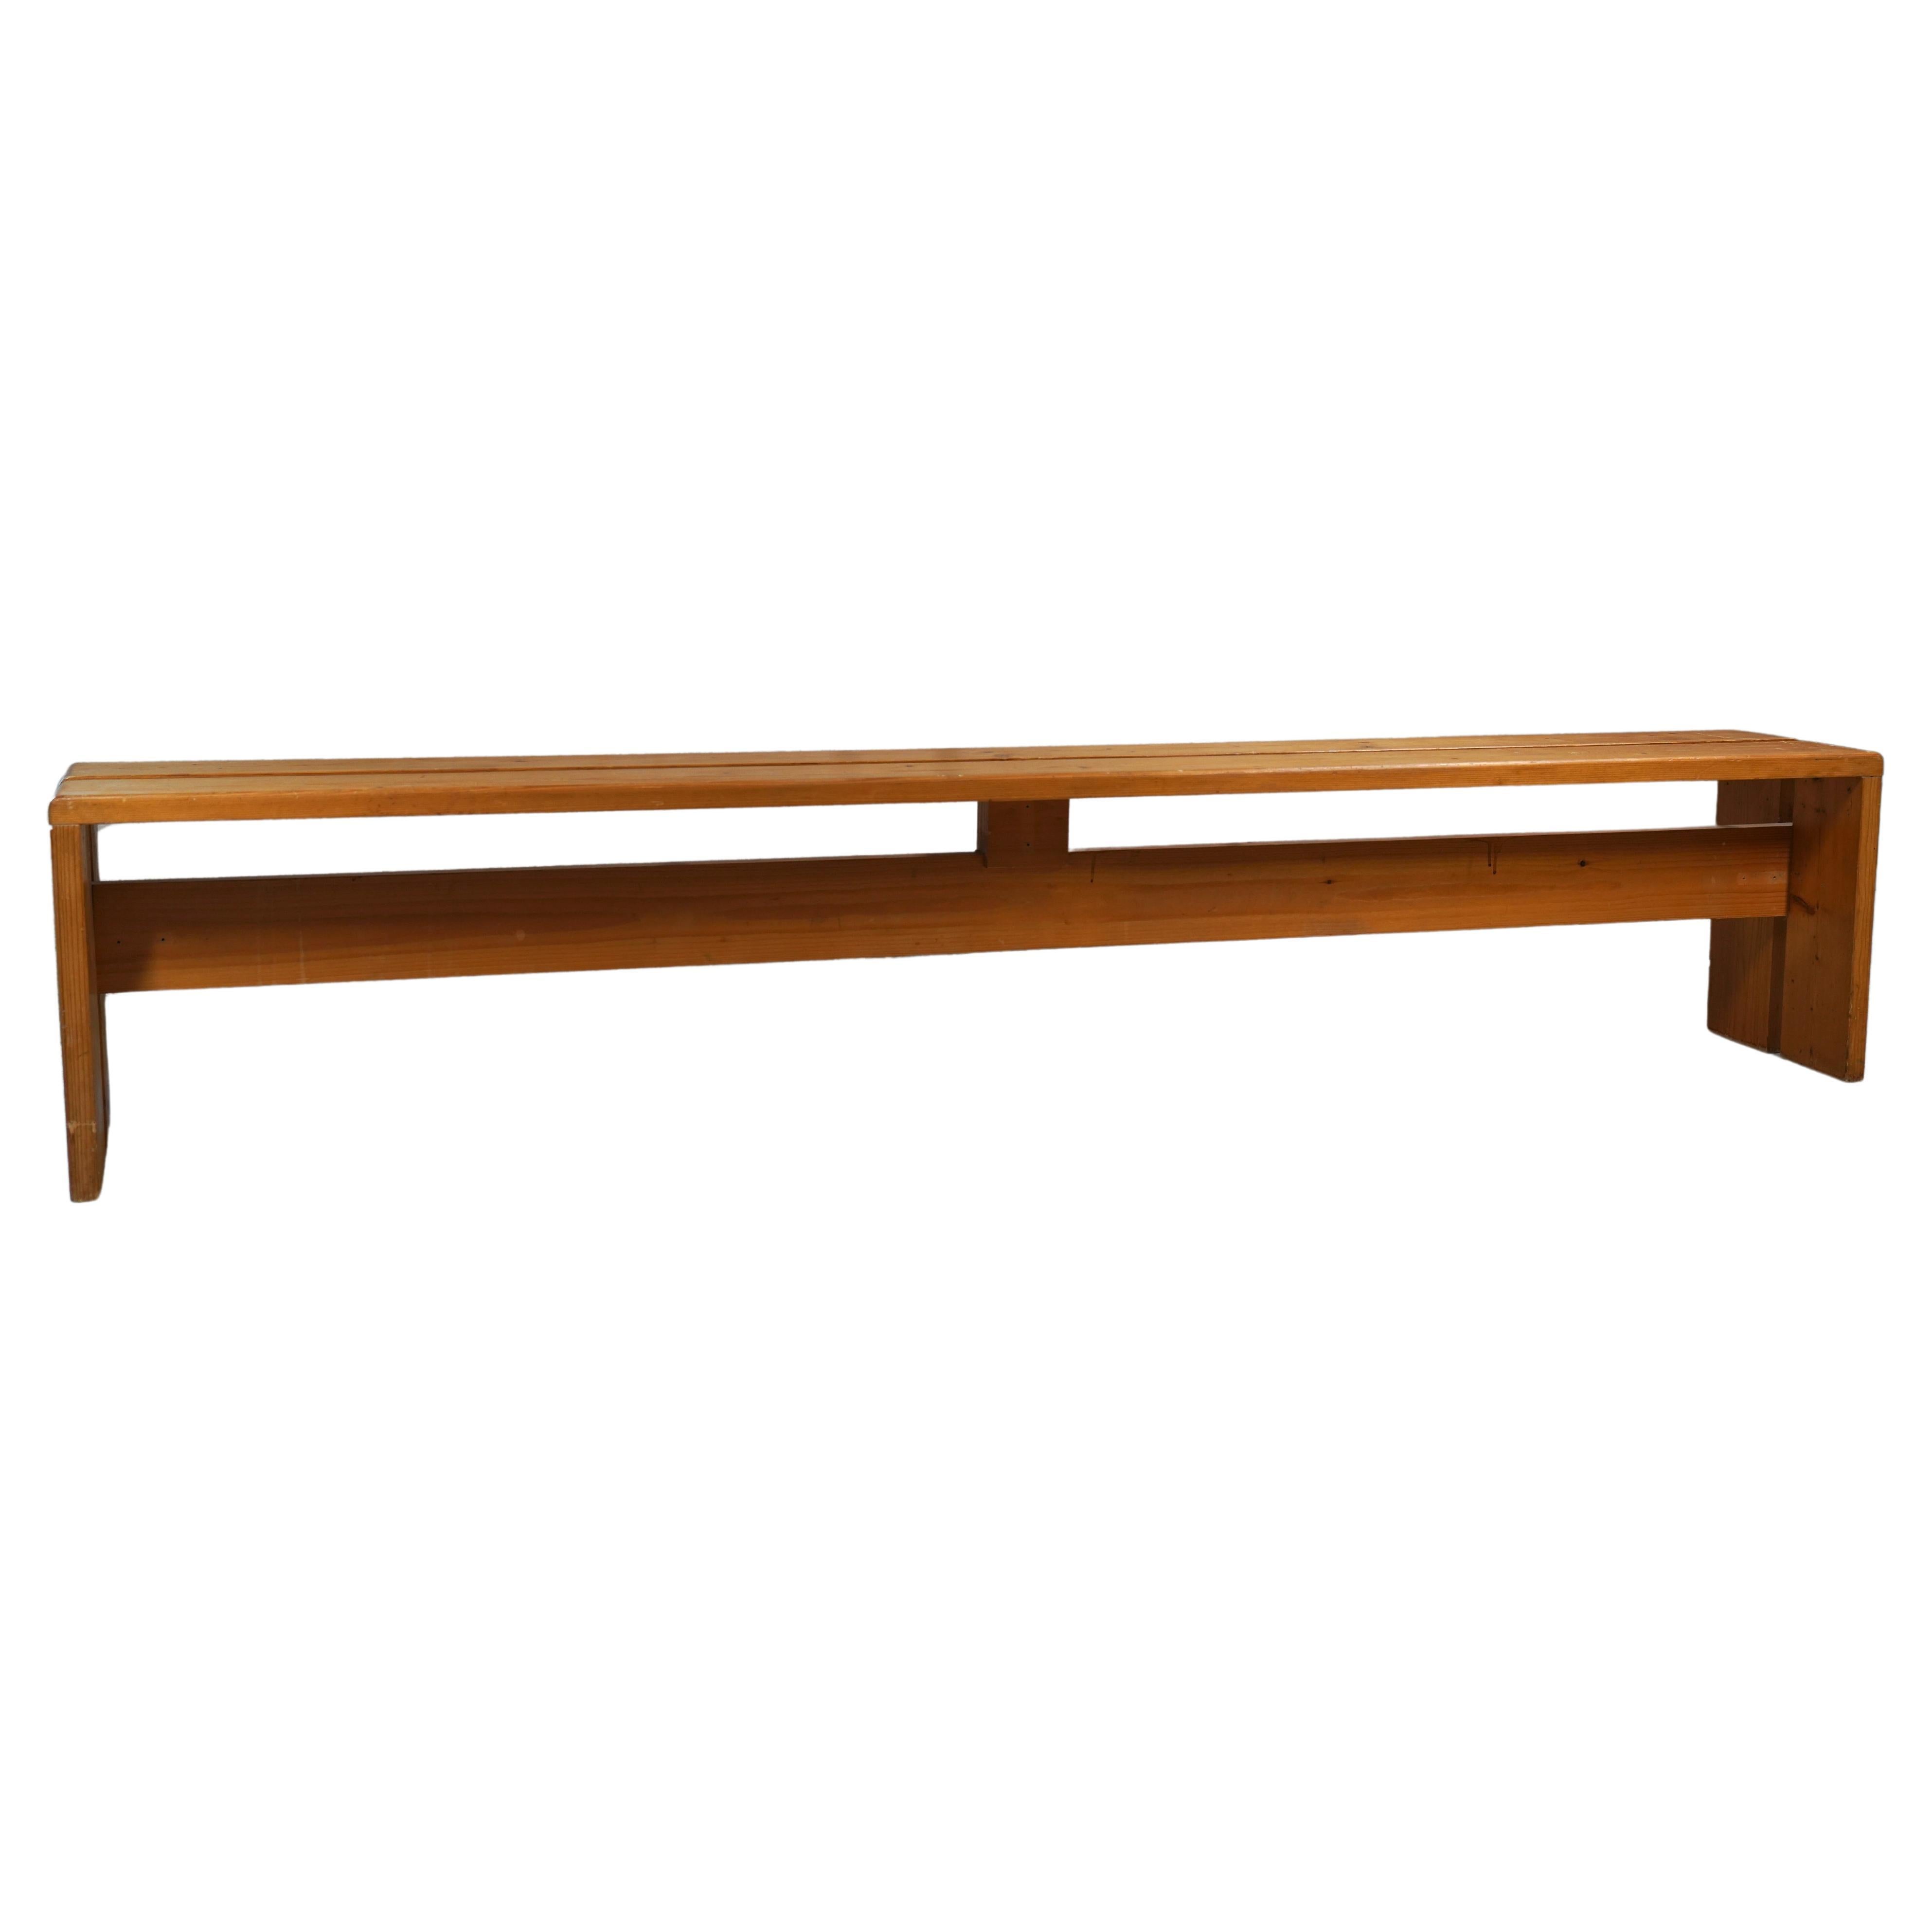 Charlotte Perriand Long Bench from Les Arcs, France circa 1968 For Sale